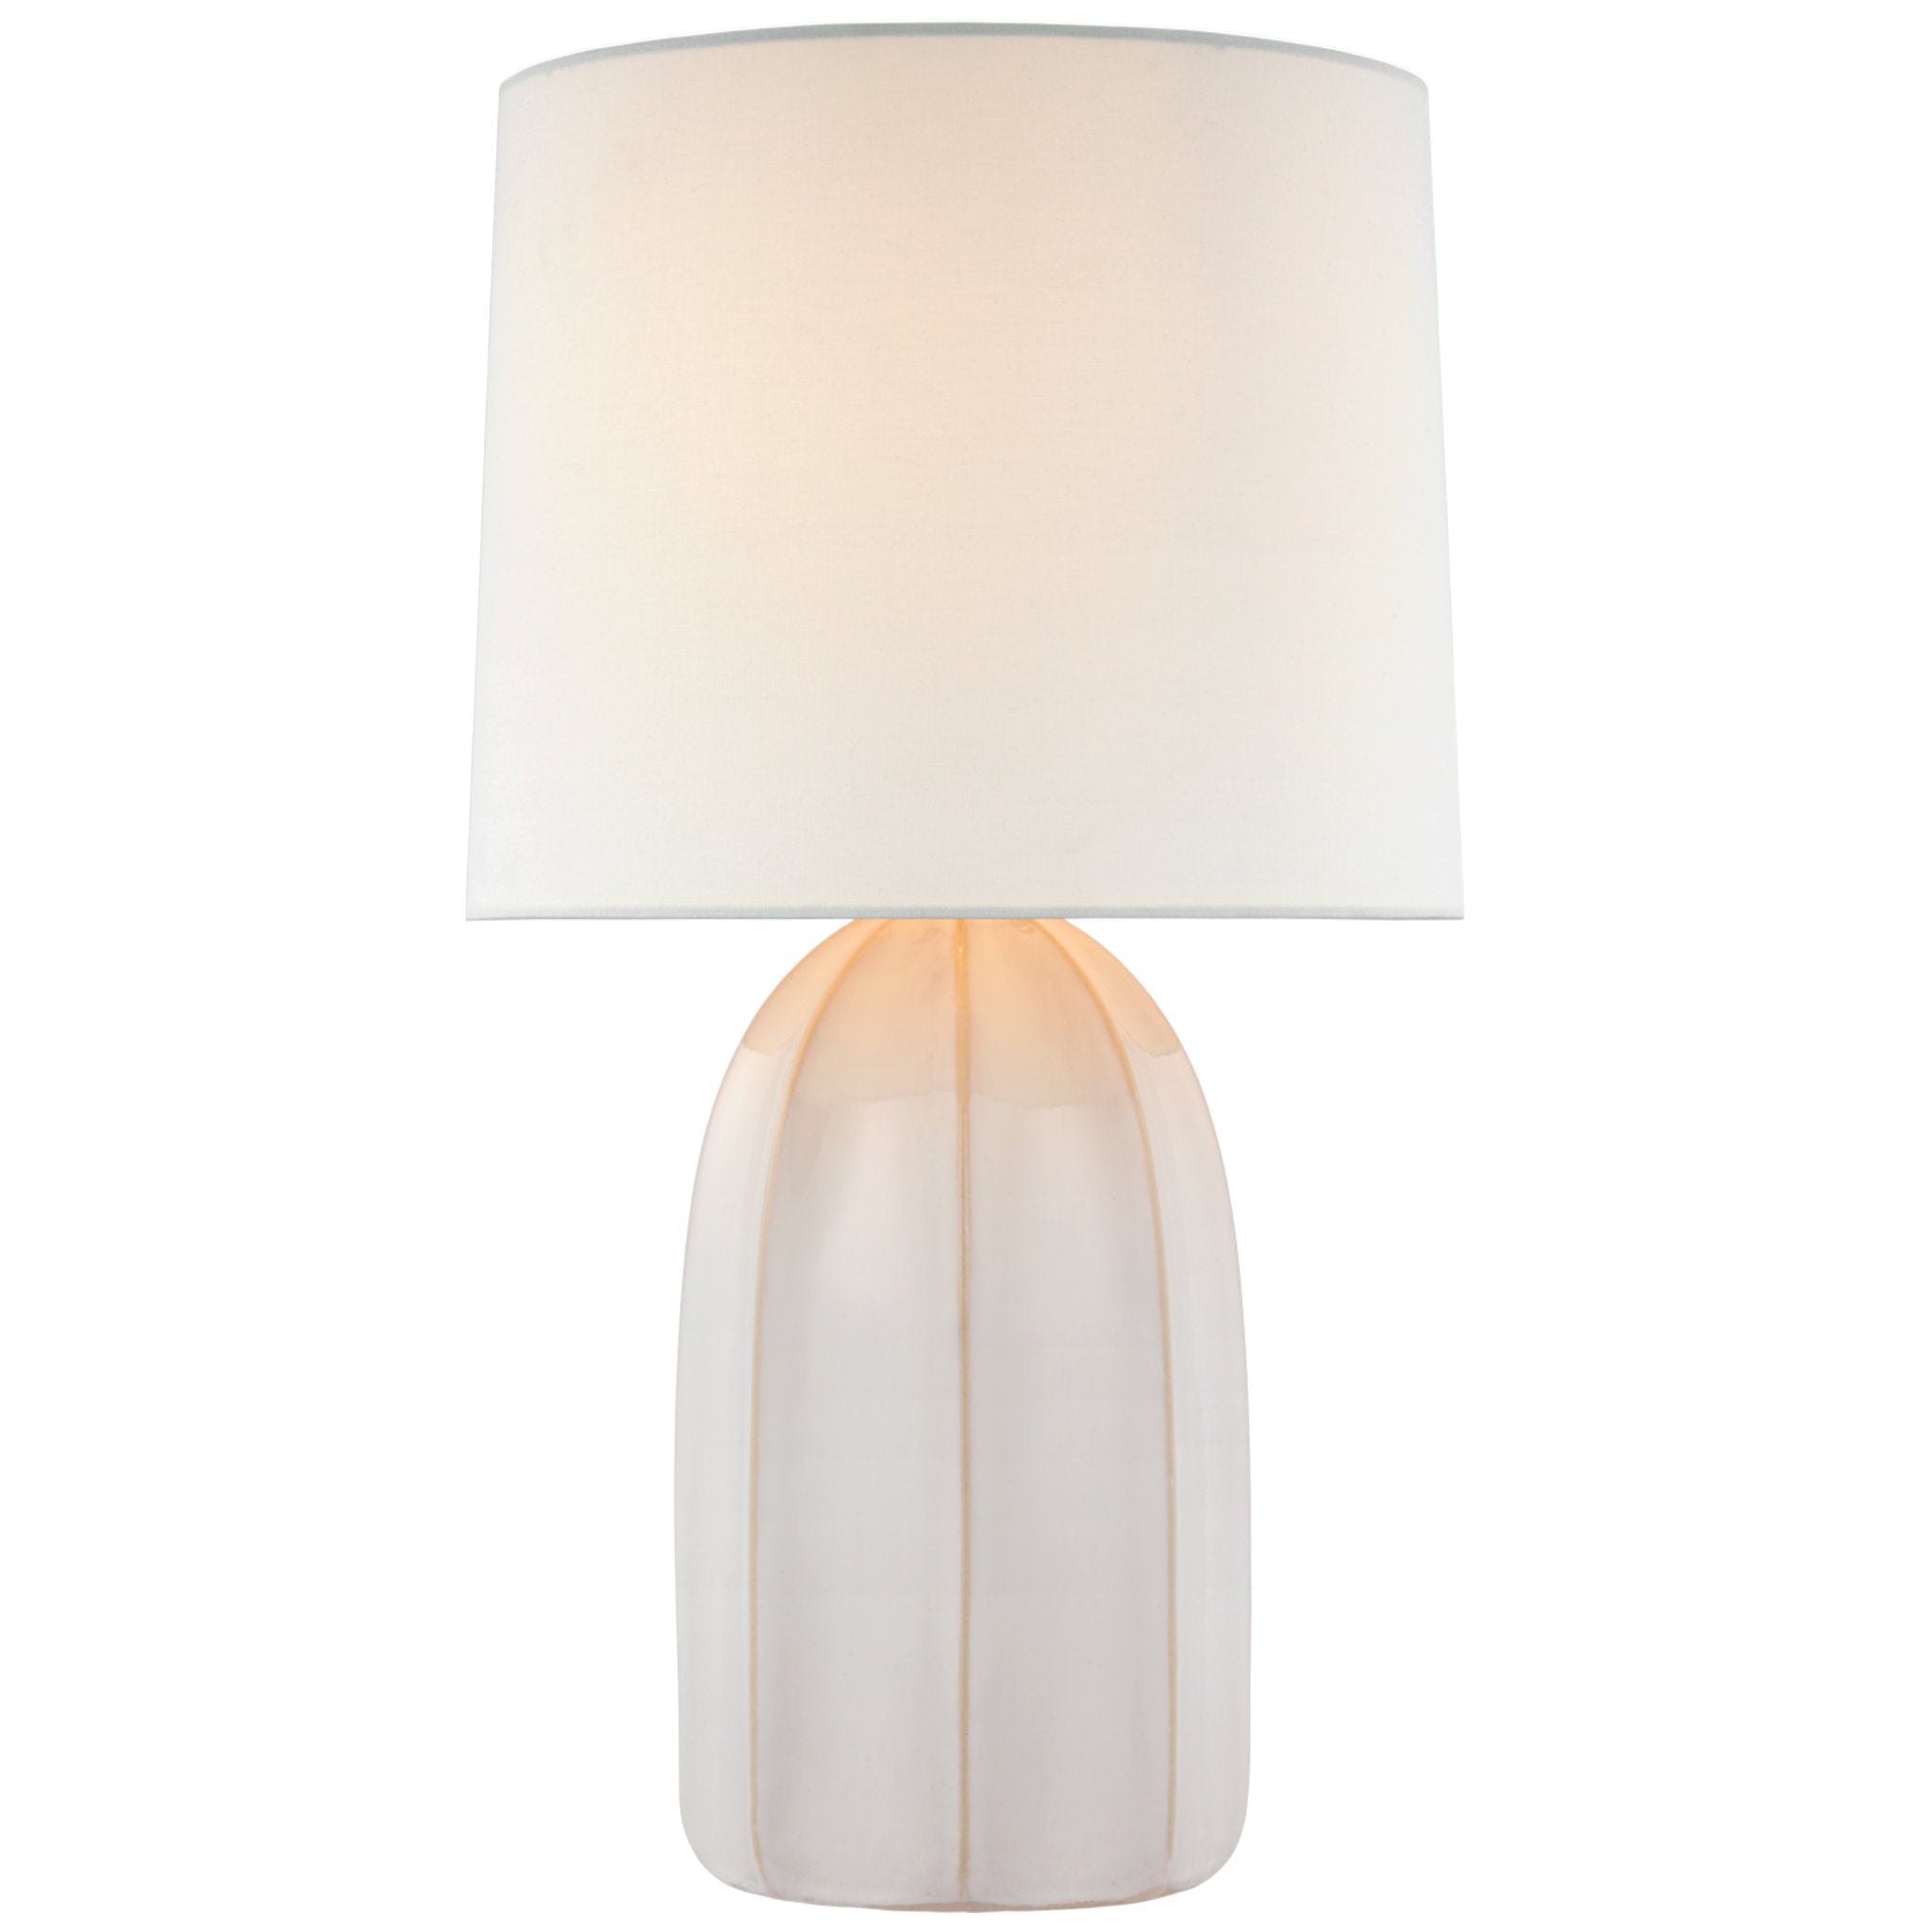 Barbara Barry Melanie Large Table Lamp in Ivory with Linen Shade